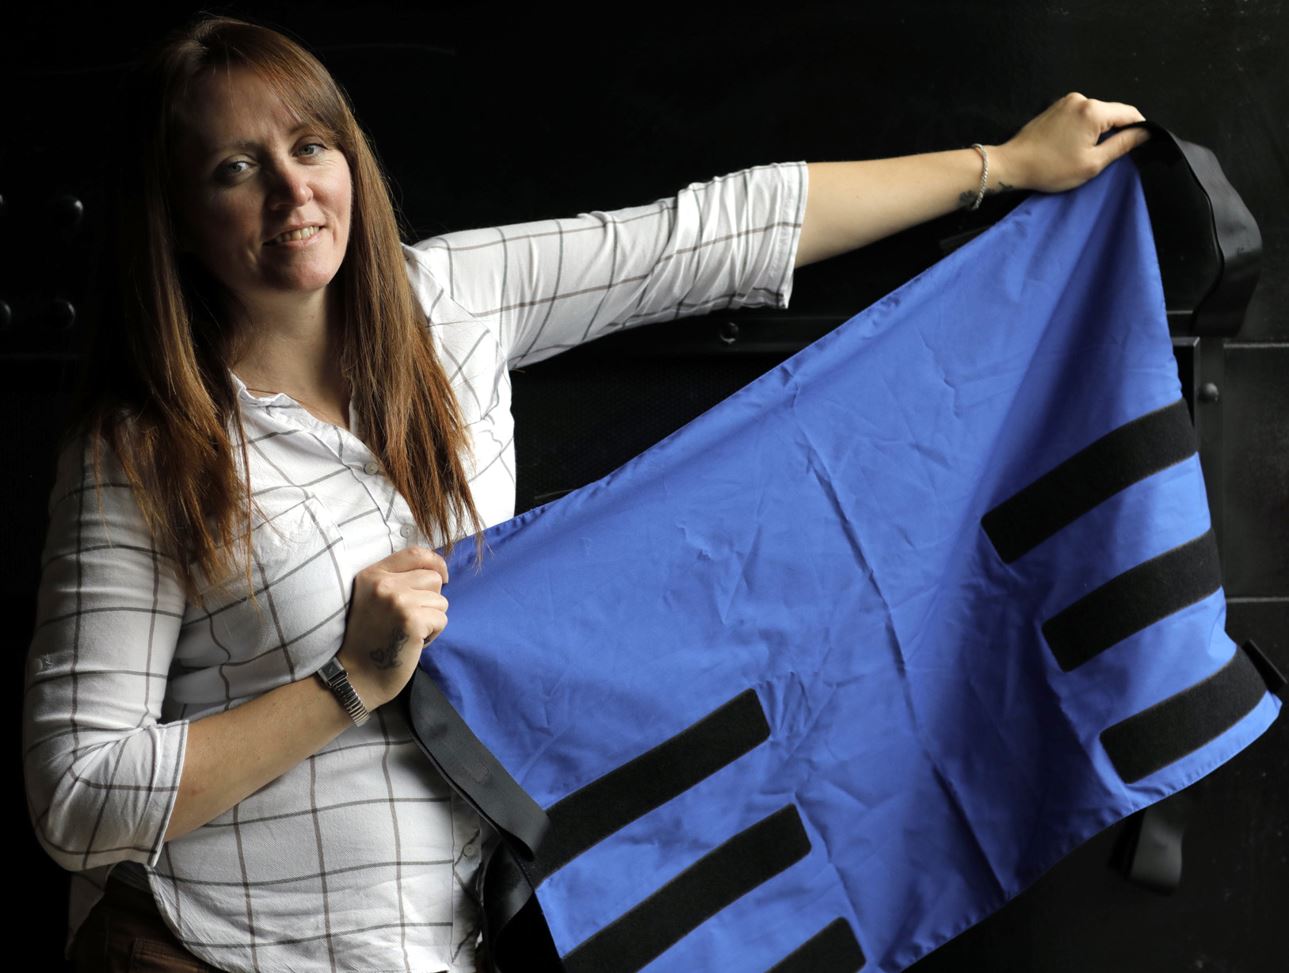 UHI nursing student secures funding to develop life changing device